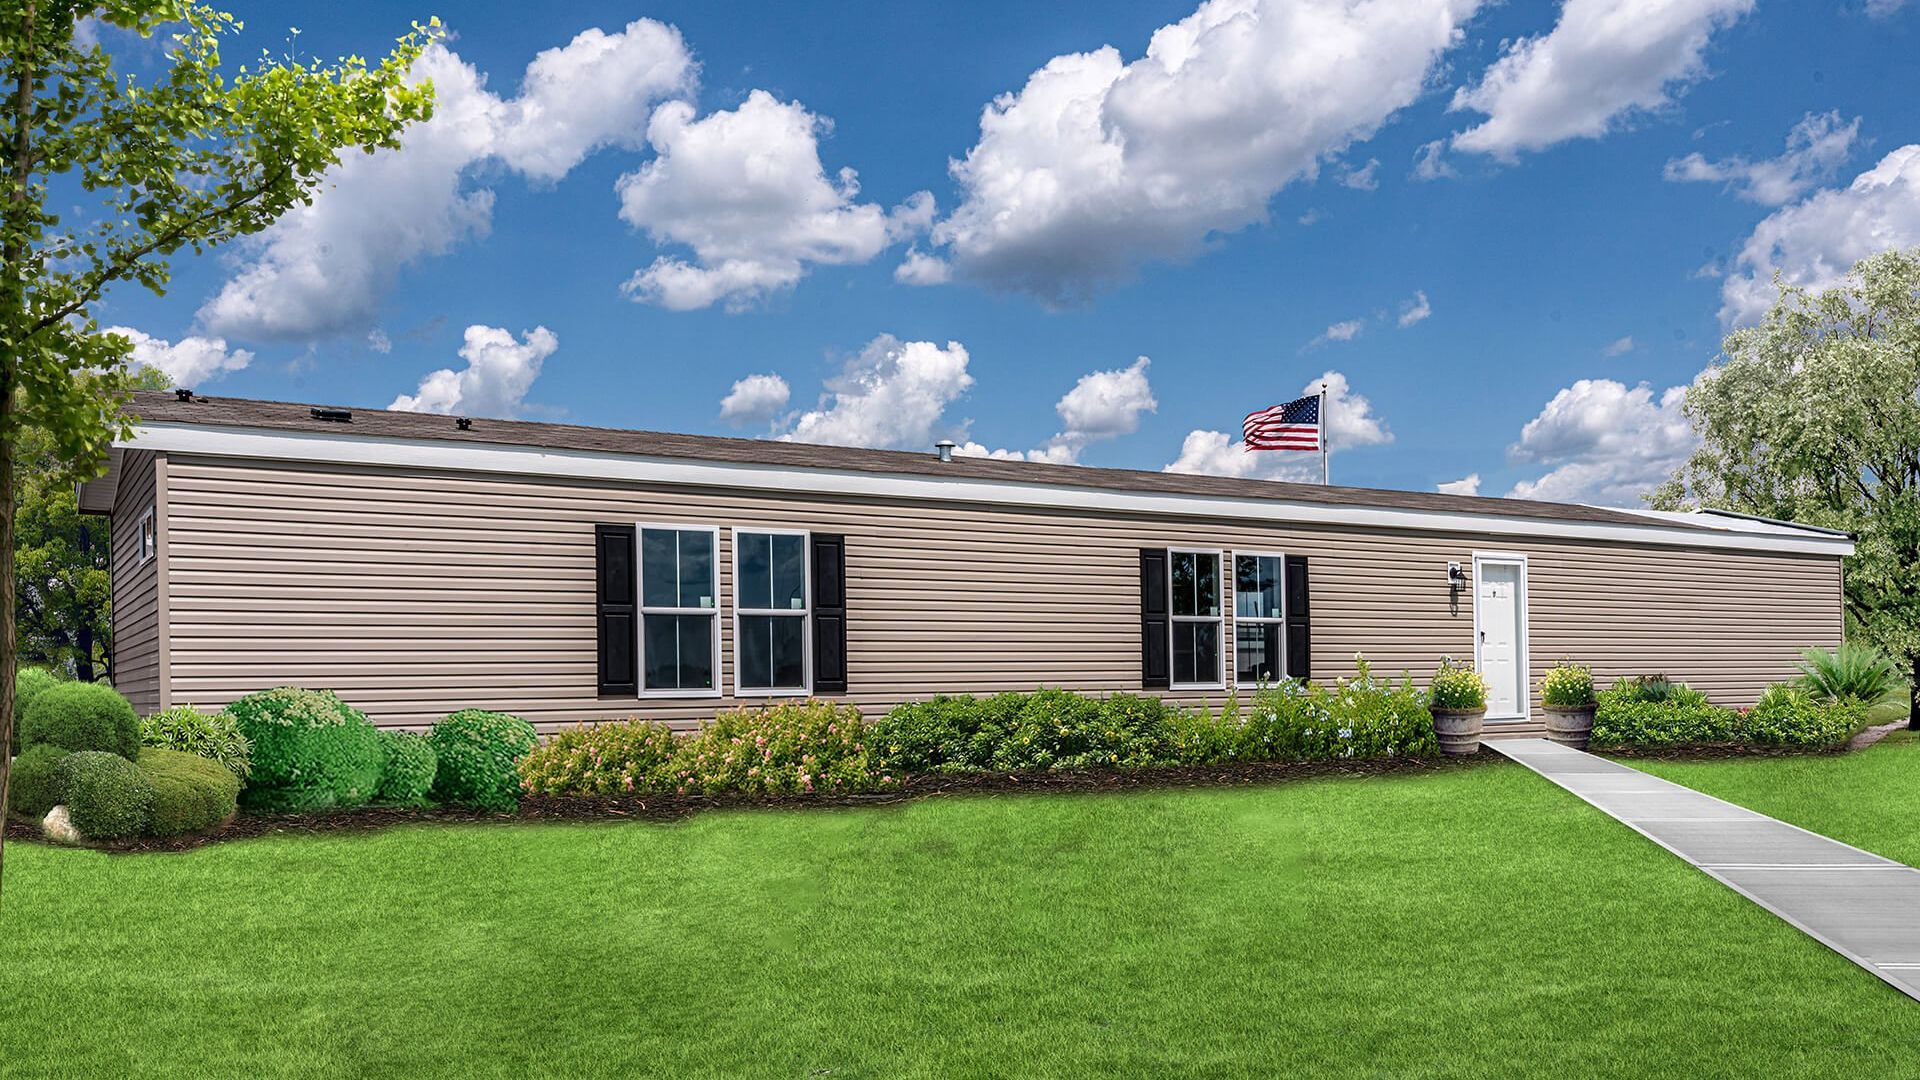 Single Wide Manufactured Home Floor Plans: The Perfect Affordable Housing Solution